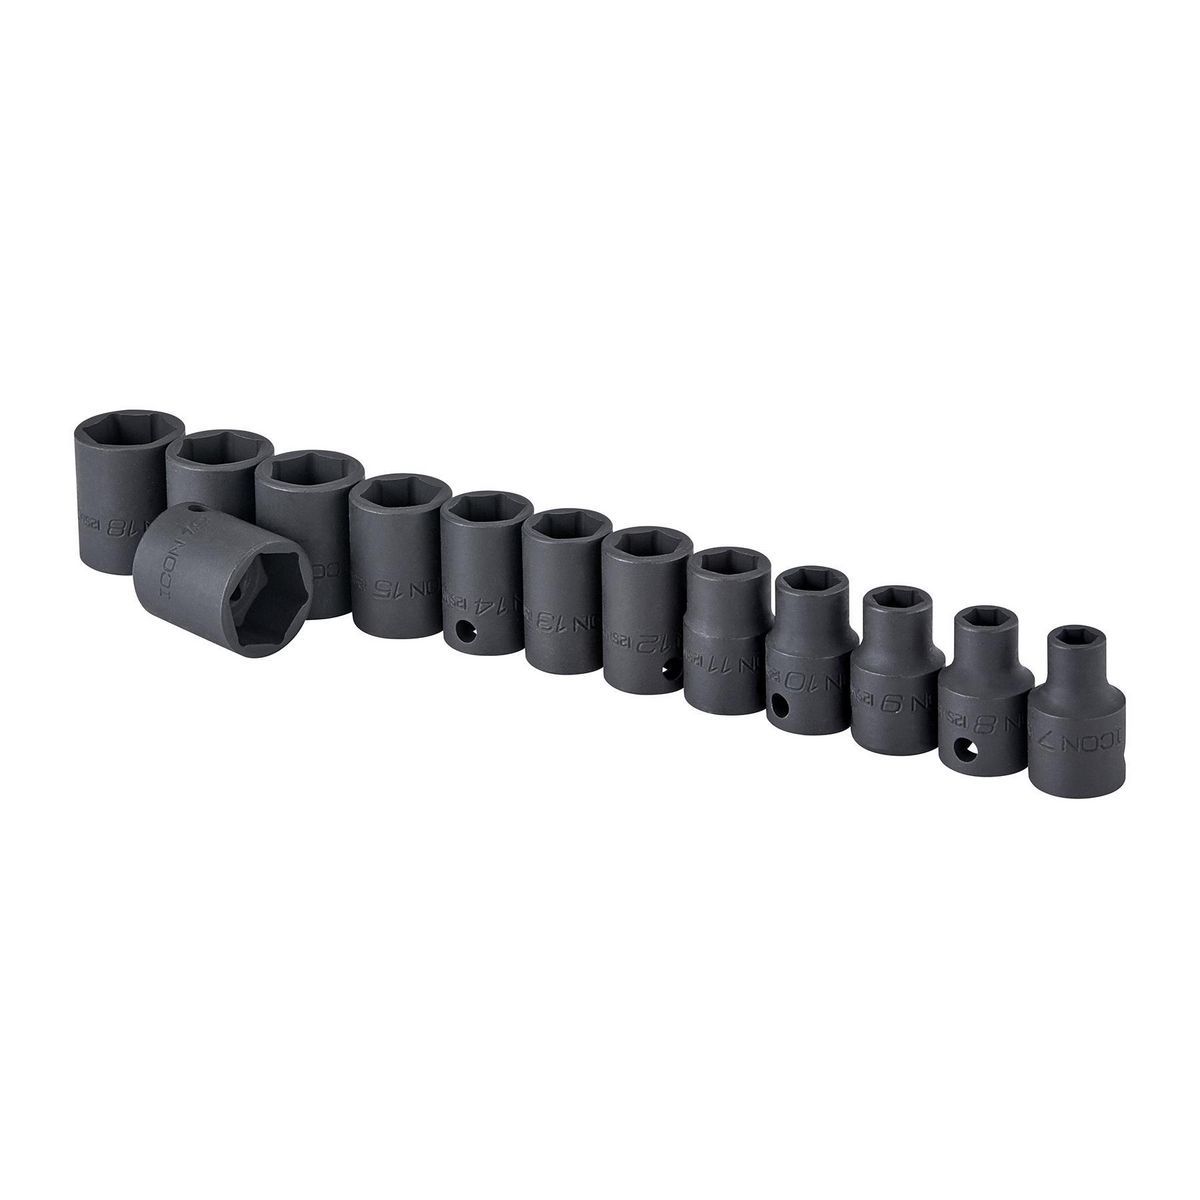 ICON 3/8 in. Drive Metric Professional Impact Socket Set, 13 Piece